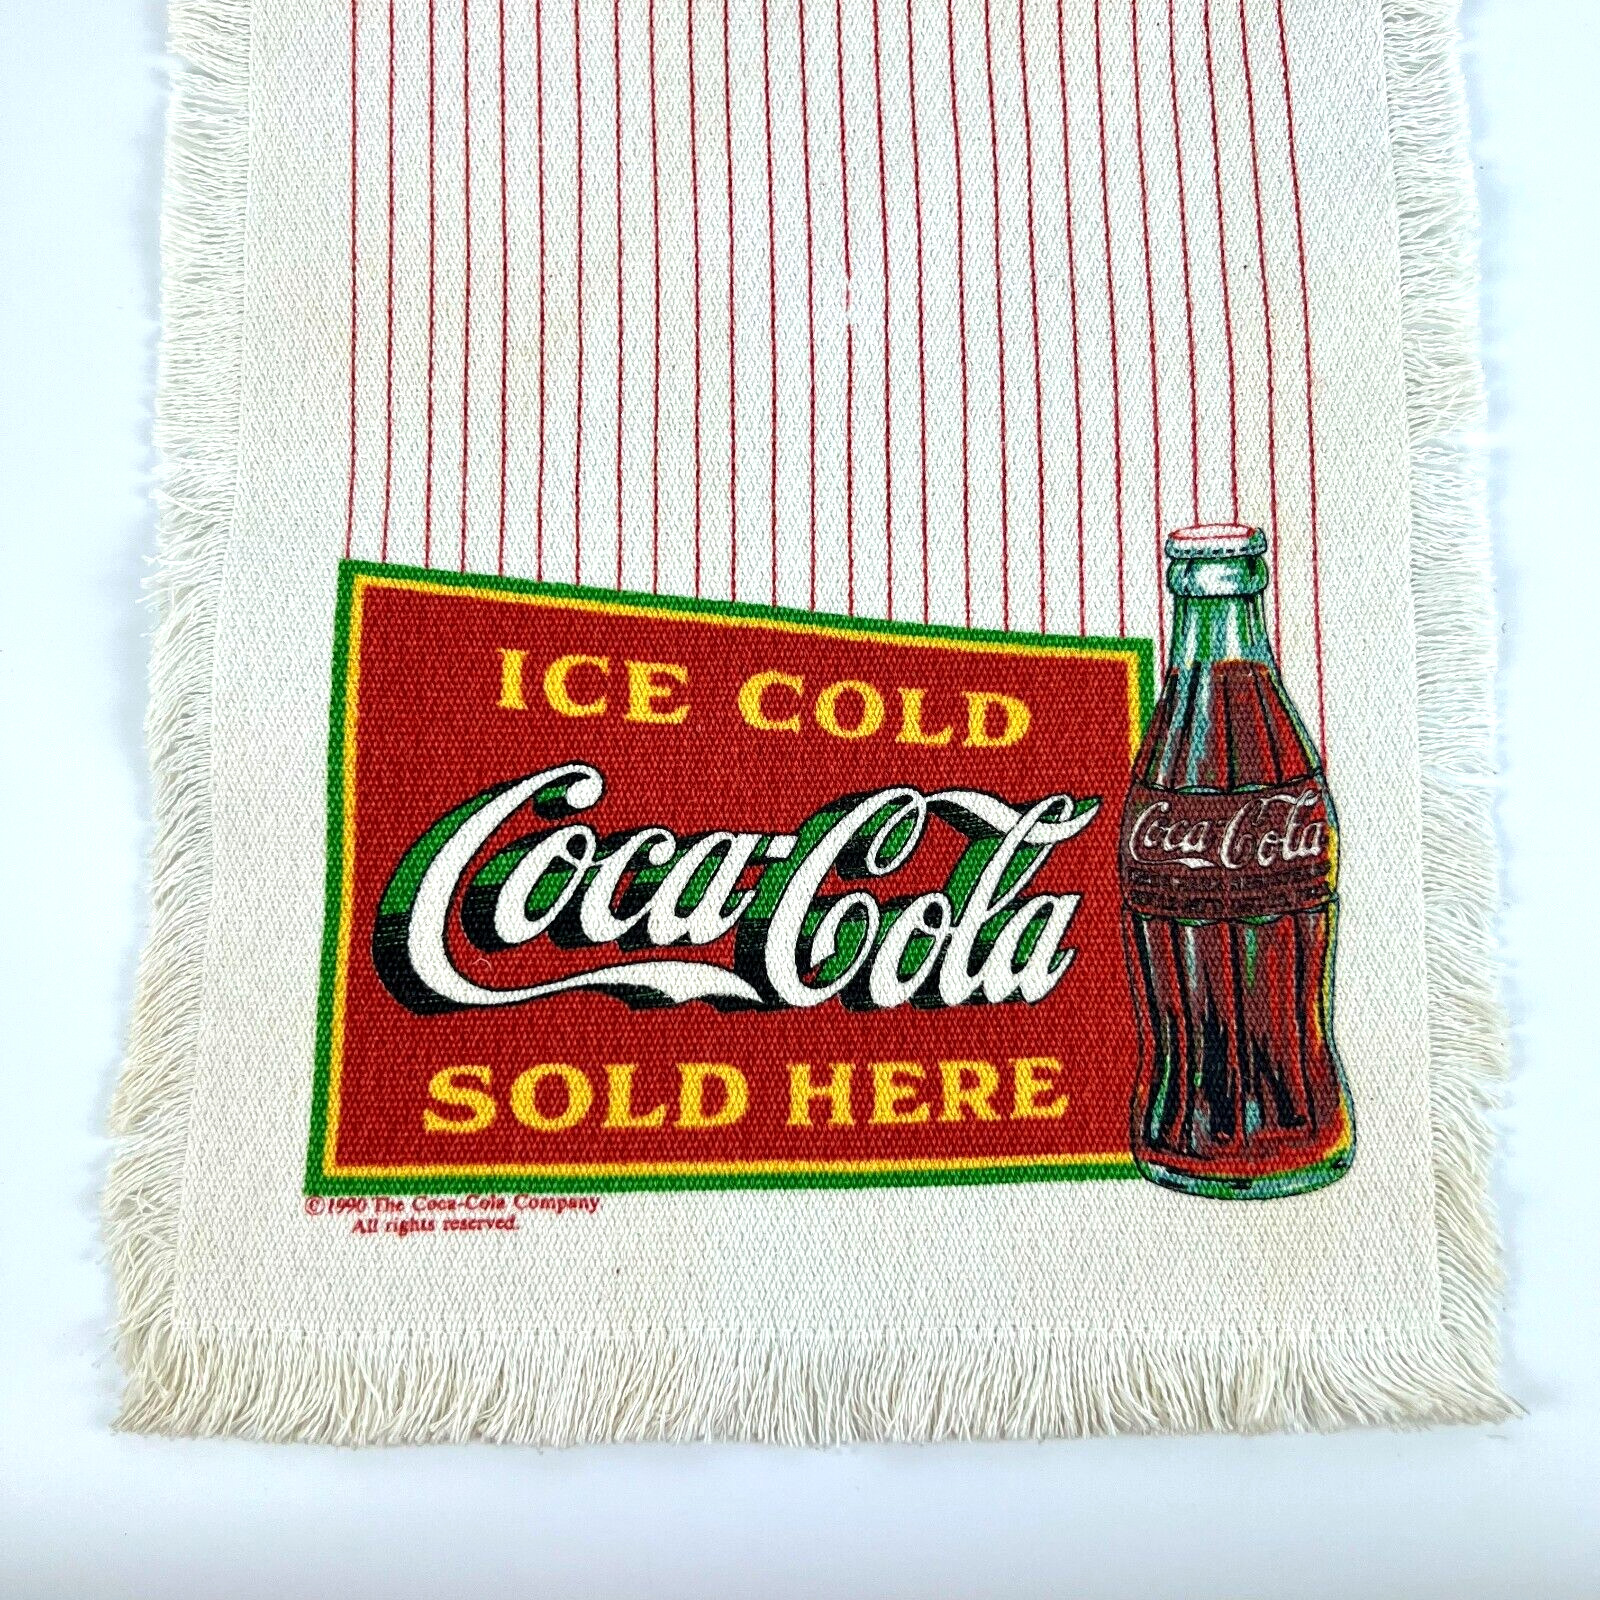 Vintage Coca-Cola Table Runner Advertisement 1990 Ice Cold Coca-Cola Sold Here